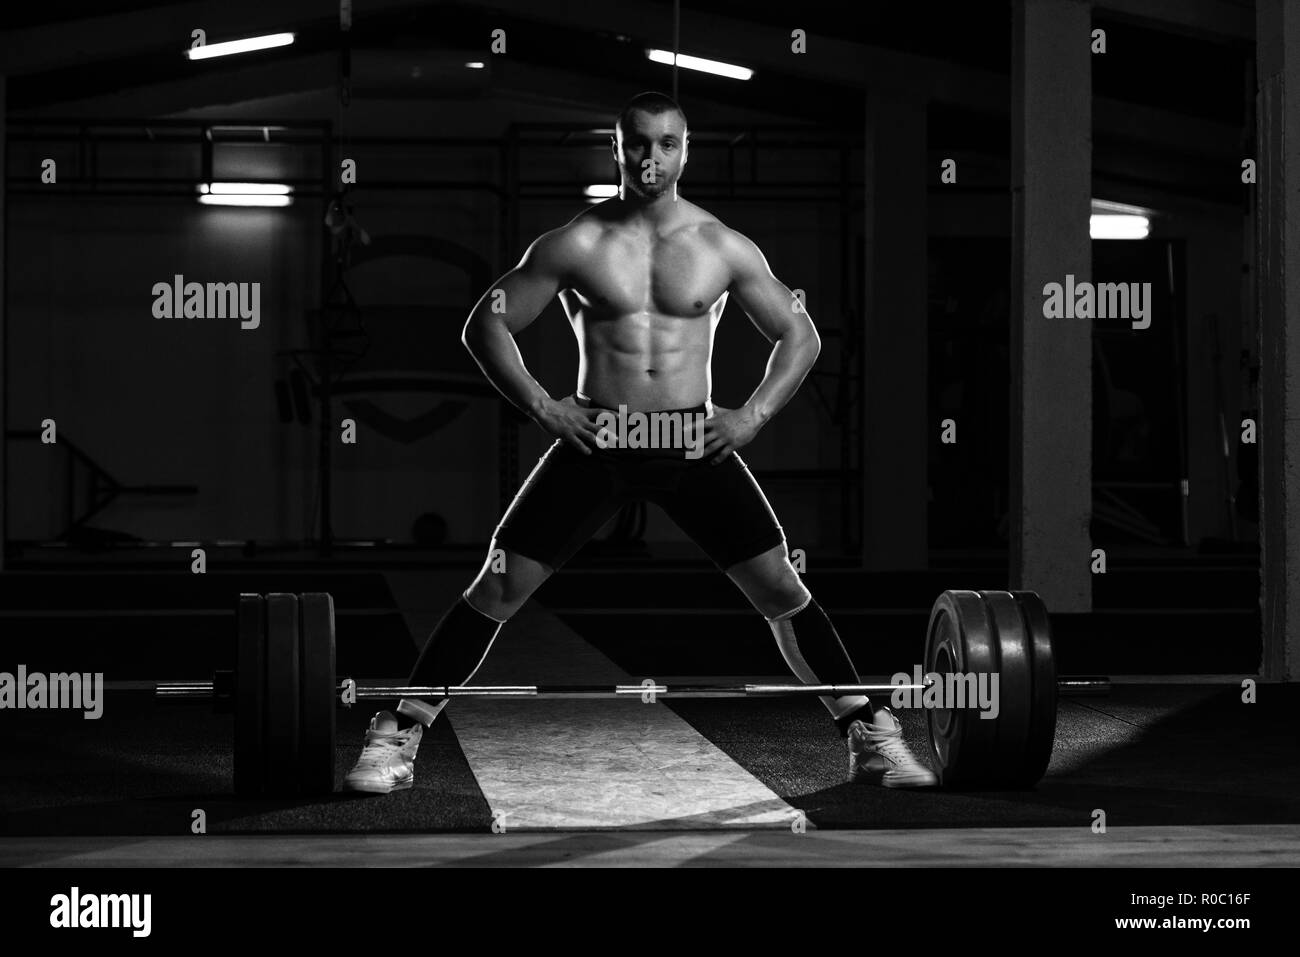 Athlete in the Gym Is Prepared to Perform an Exercise Deadlift Stock Photo